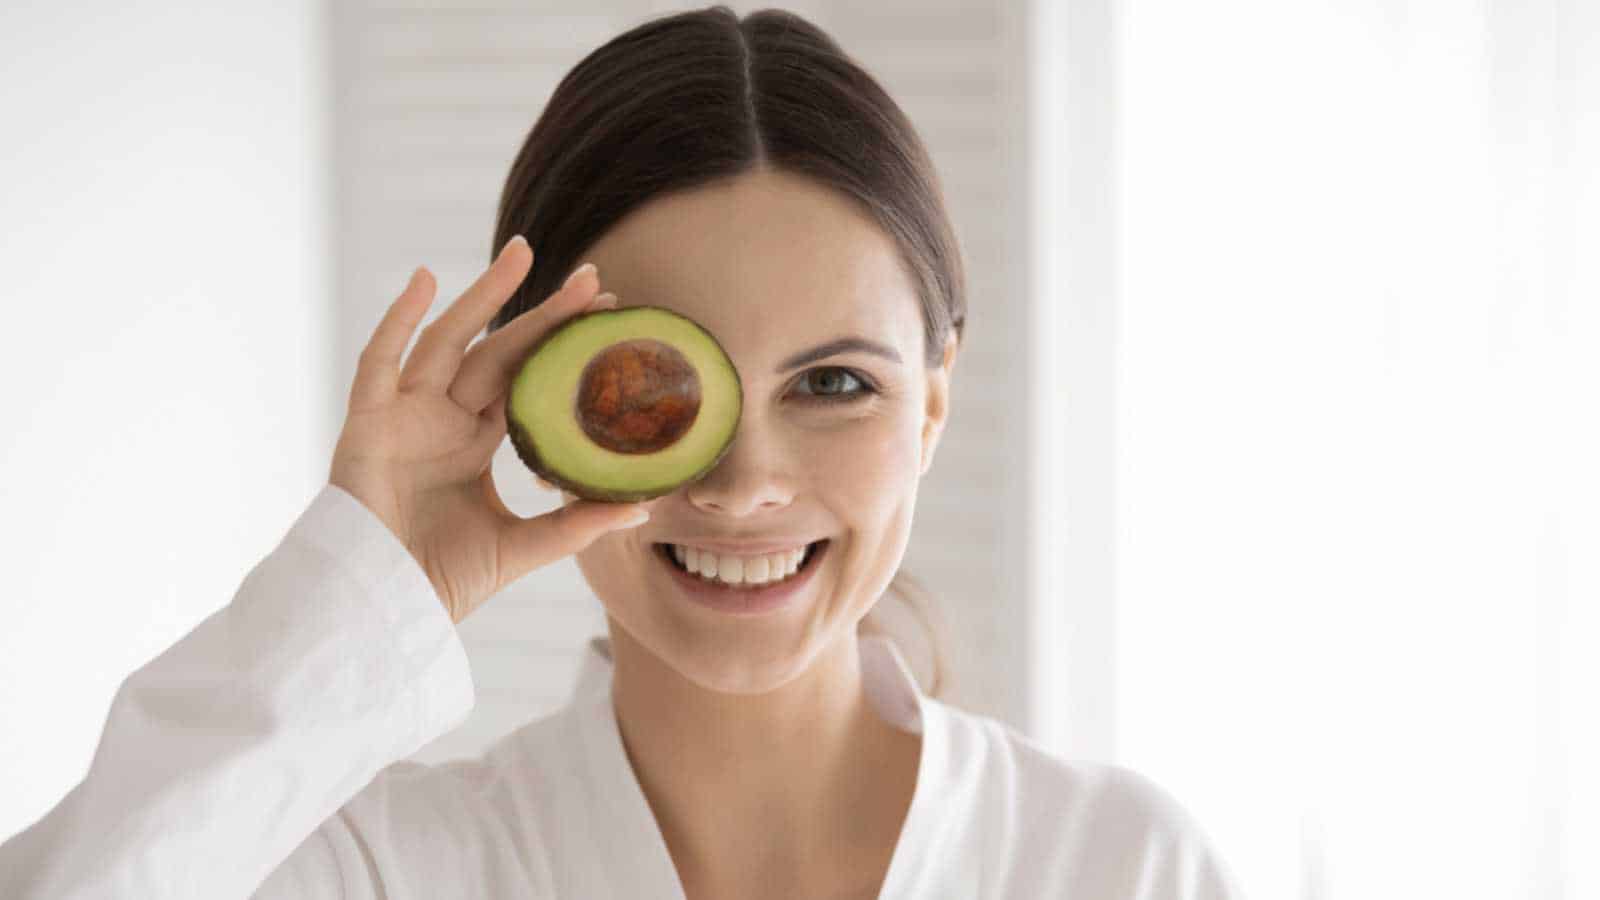 A woman holding an avocado in front of her eye, showcasing one of the 10 deliciously healthy foods that women can't get enough of.